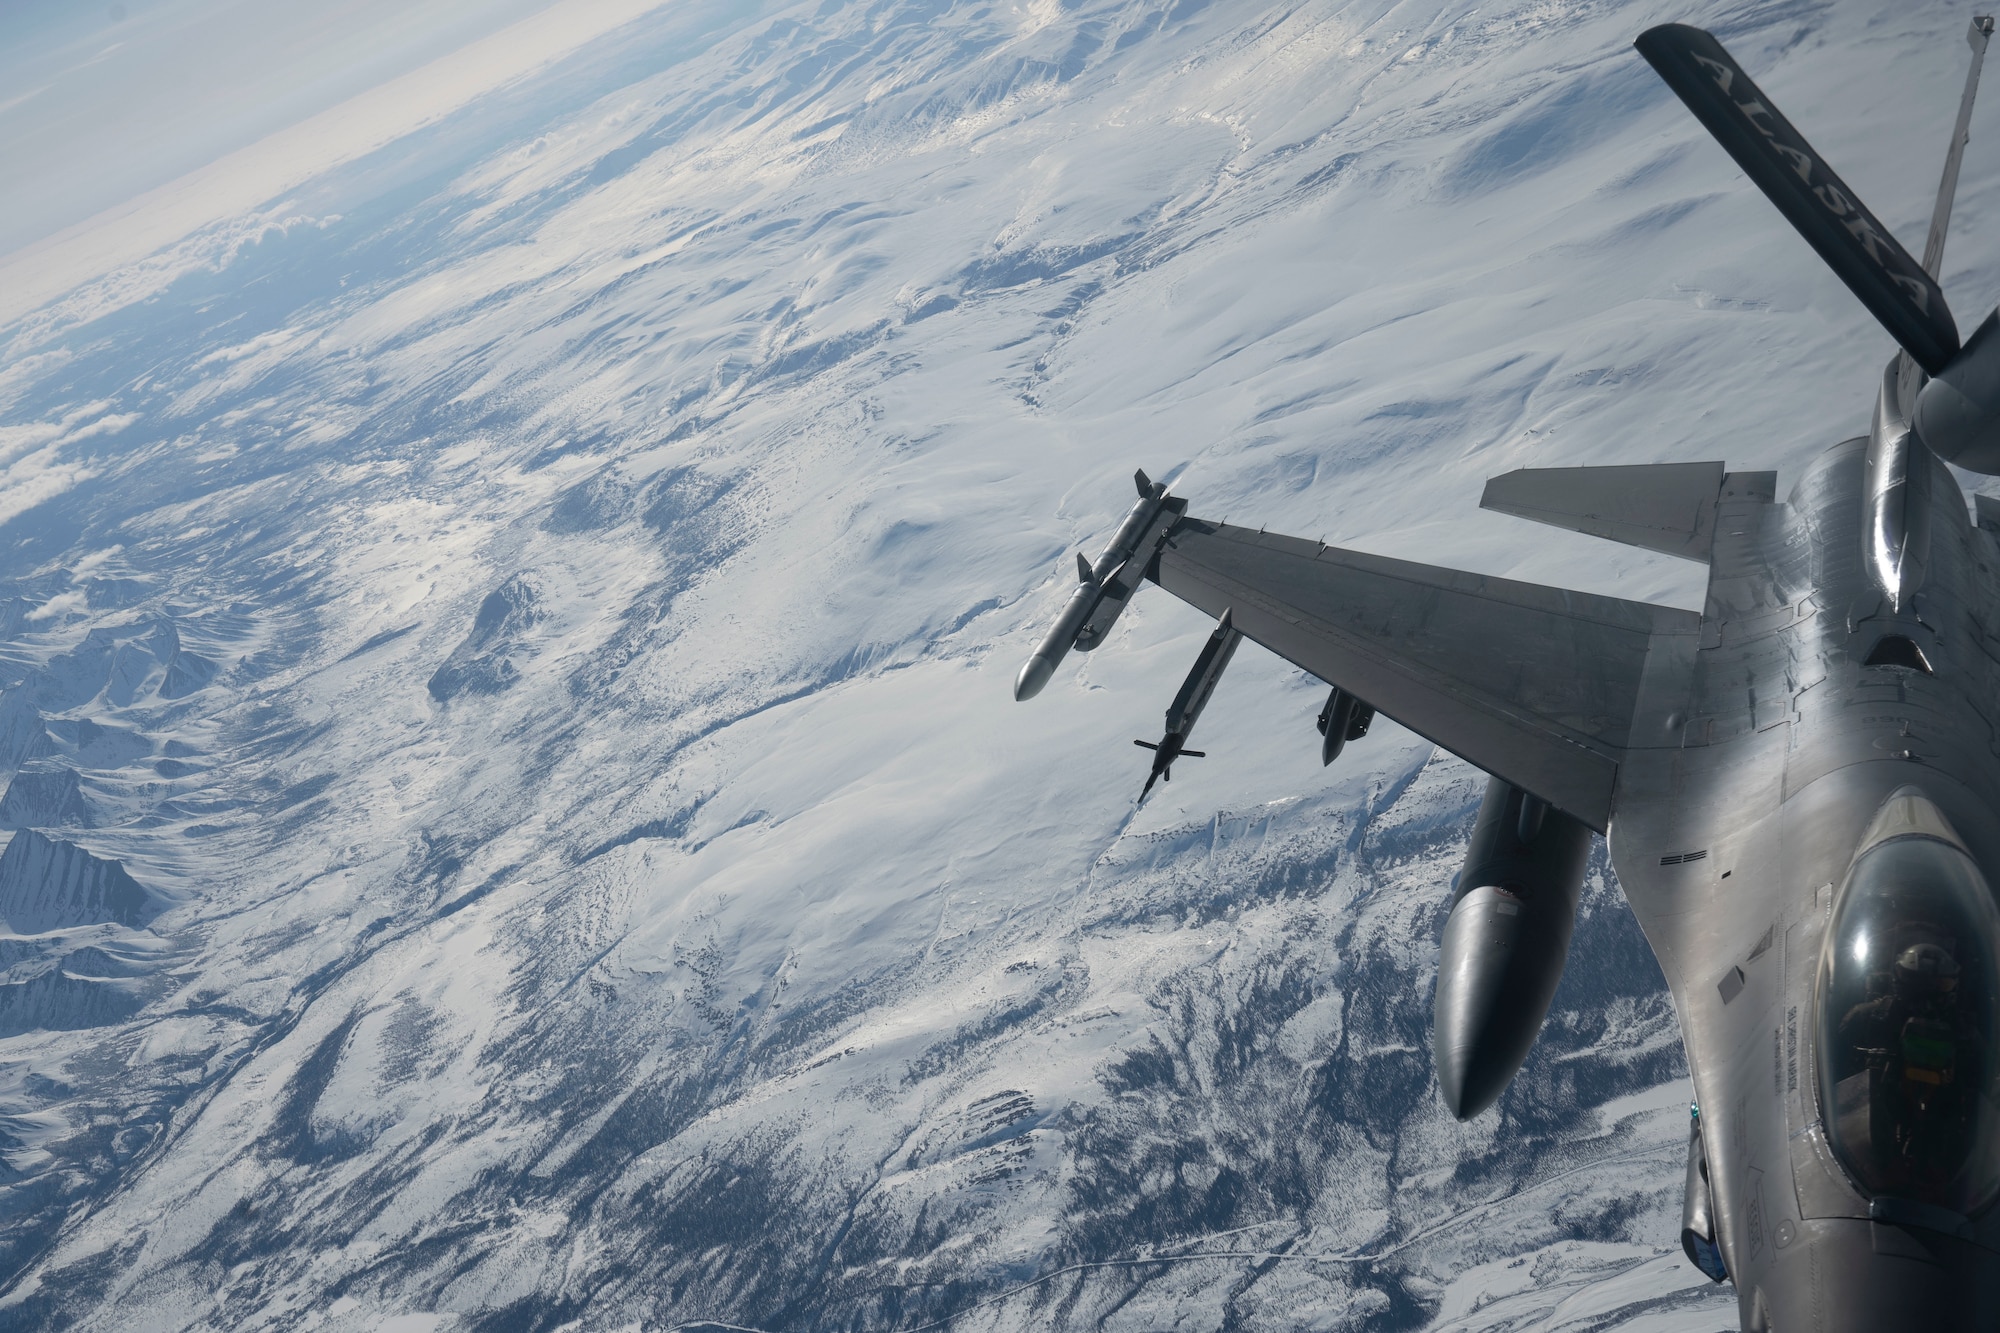 A U.S. Air Force F-16 Fighting Falcon assigned to the 354th Fighter Wing, Eielson Air Force Base, Alaska, receives fuel from a KC-135 Stratotanker assigned to the 909th Air Refueling Squadron, Kadena Air Base, Japan, over the Joint Pacific-Alaska Range Complex, during RED FLAG-Alaska 24-1, Apr. 26, 2024. The KC-135 was recently transferred to the 909th ARS from the Alaska Air National Guard. RED FLAG-Alaska provides unique opportunities to integrate various forces into joint, coalition and multilateral training from simulated forward operating bases. (U.S. Air Force Photo by Senior Airman Julia Lebens)